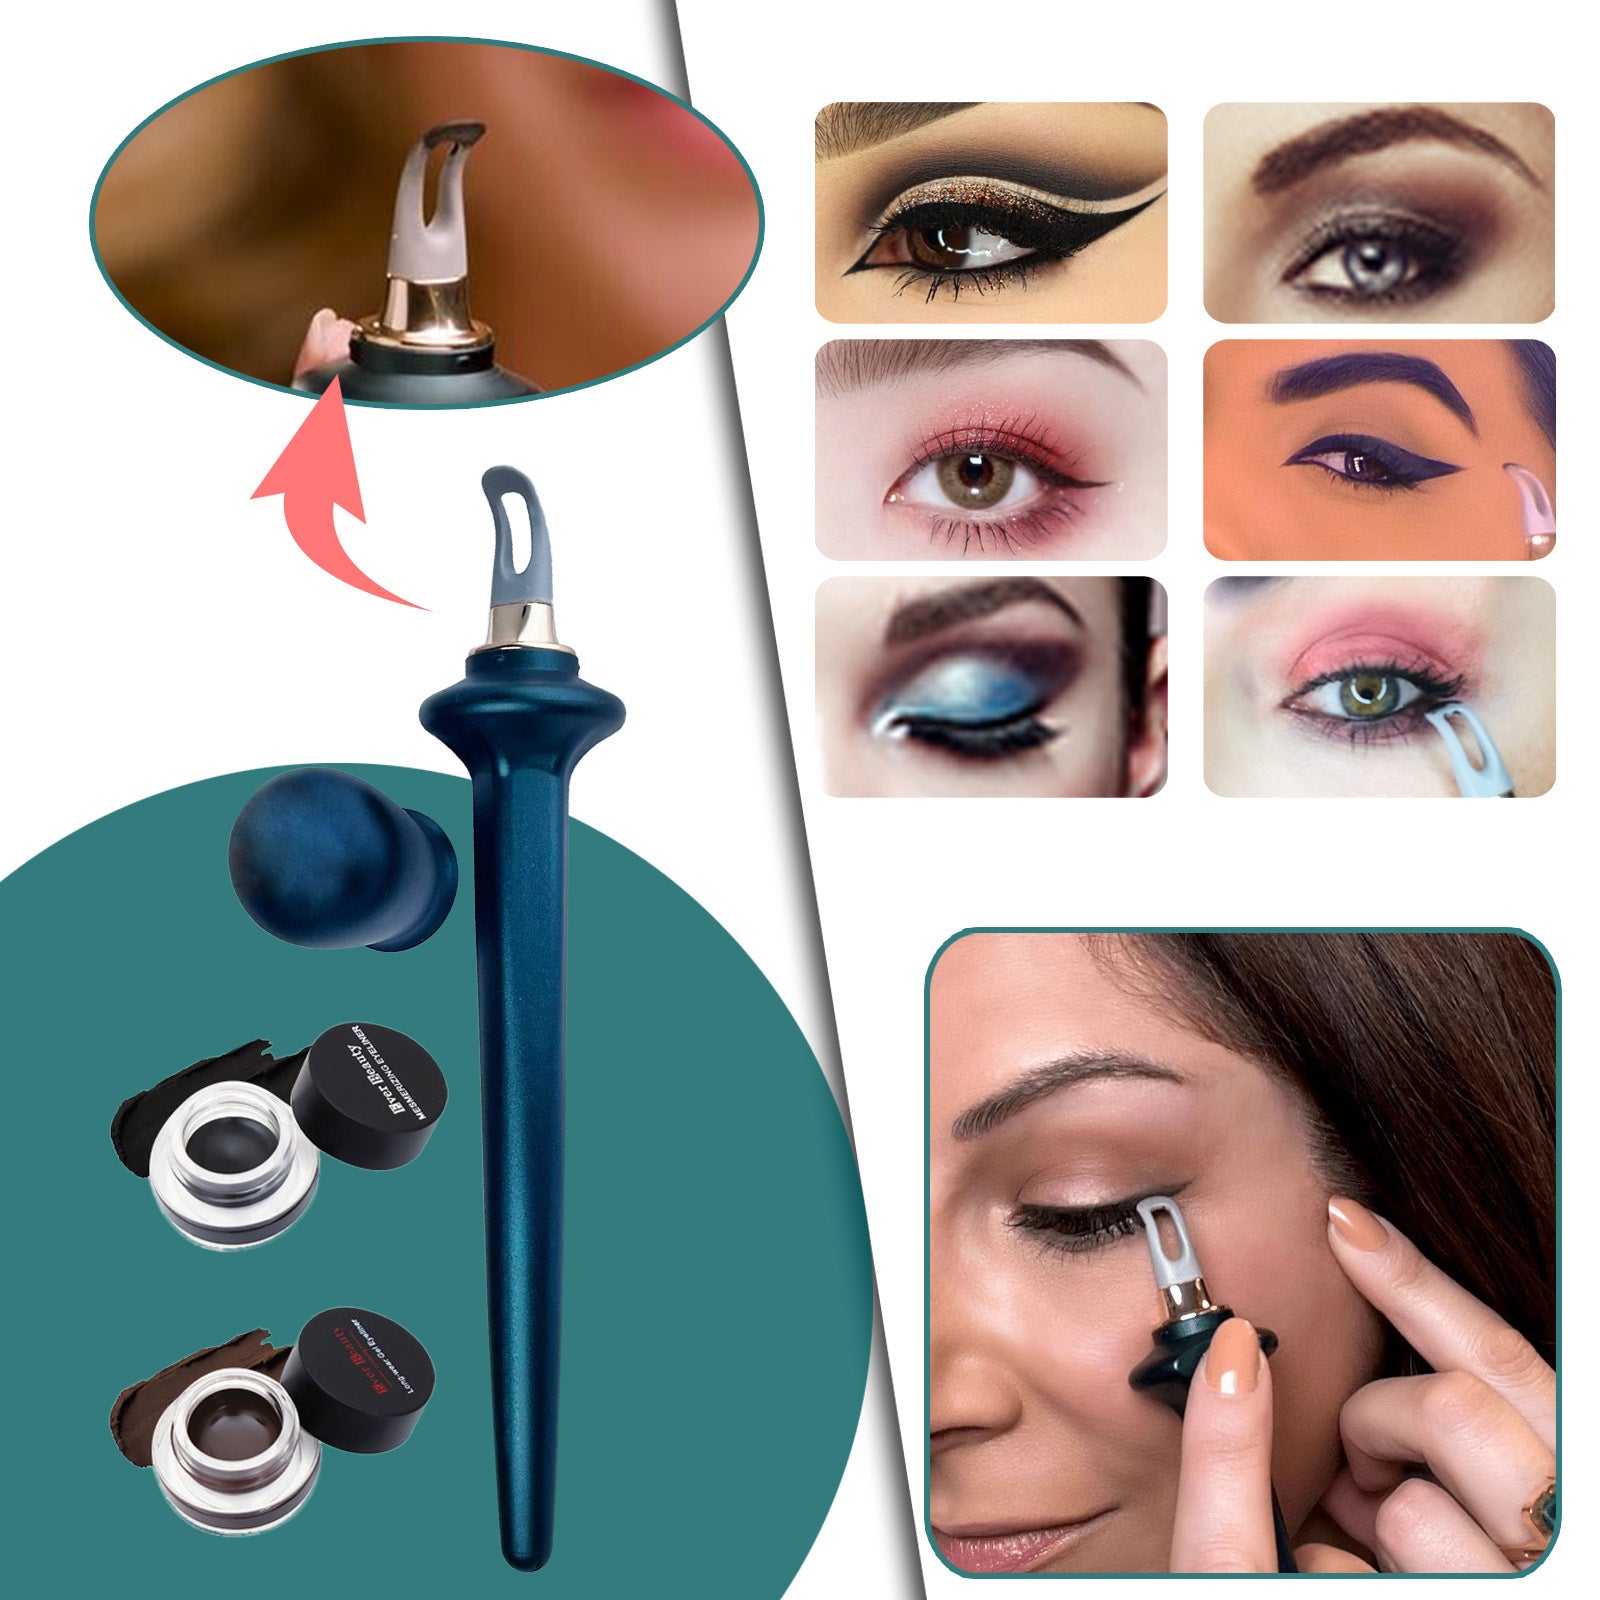 Perfect Precision: No-Skip Eyeliner Guide Tools with Reusable Silicone, Gel Pencil Set